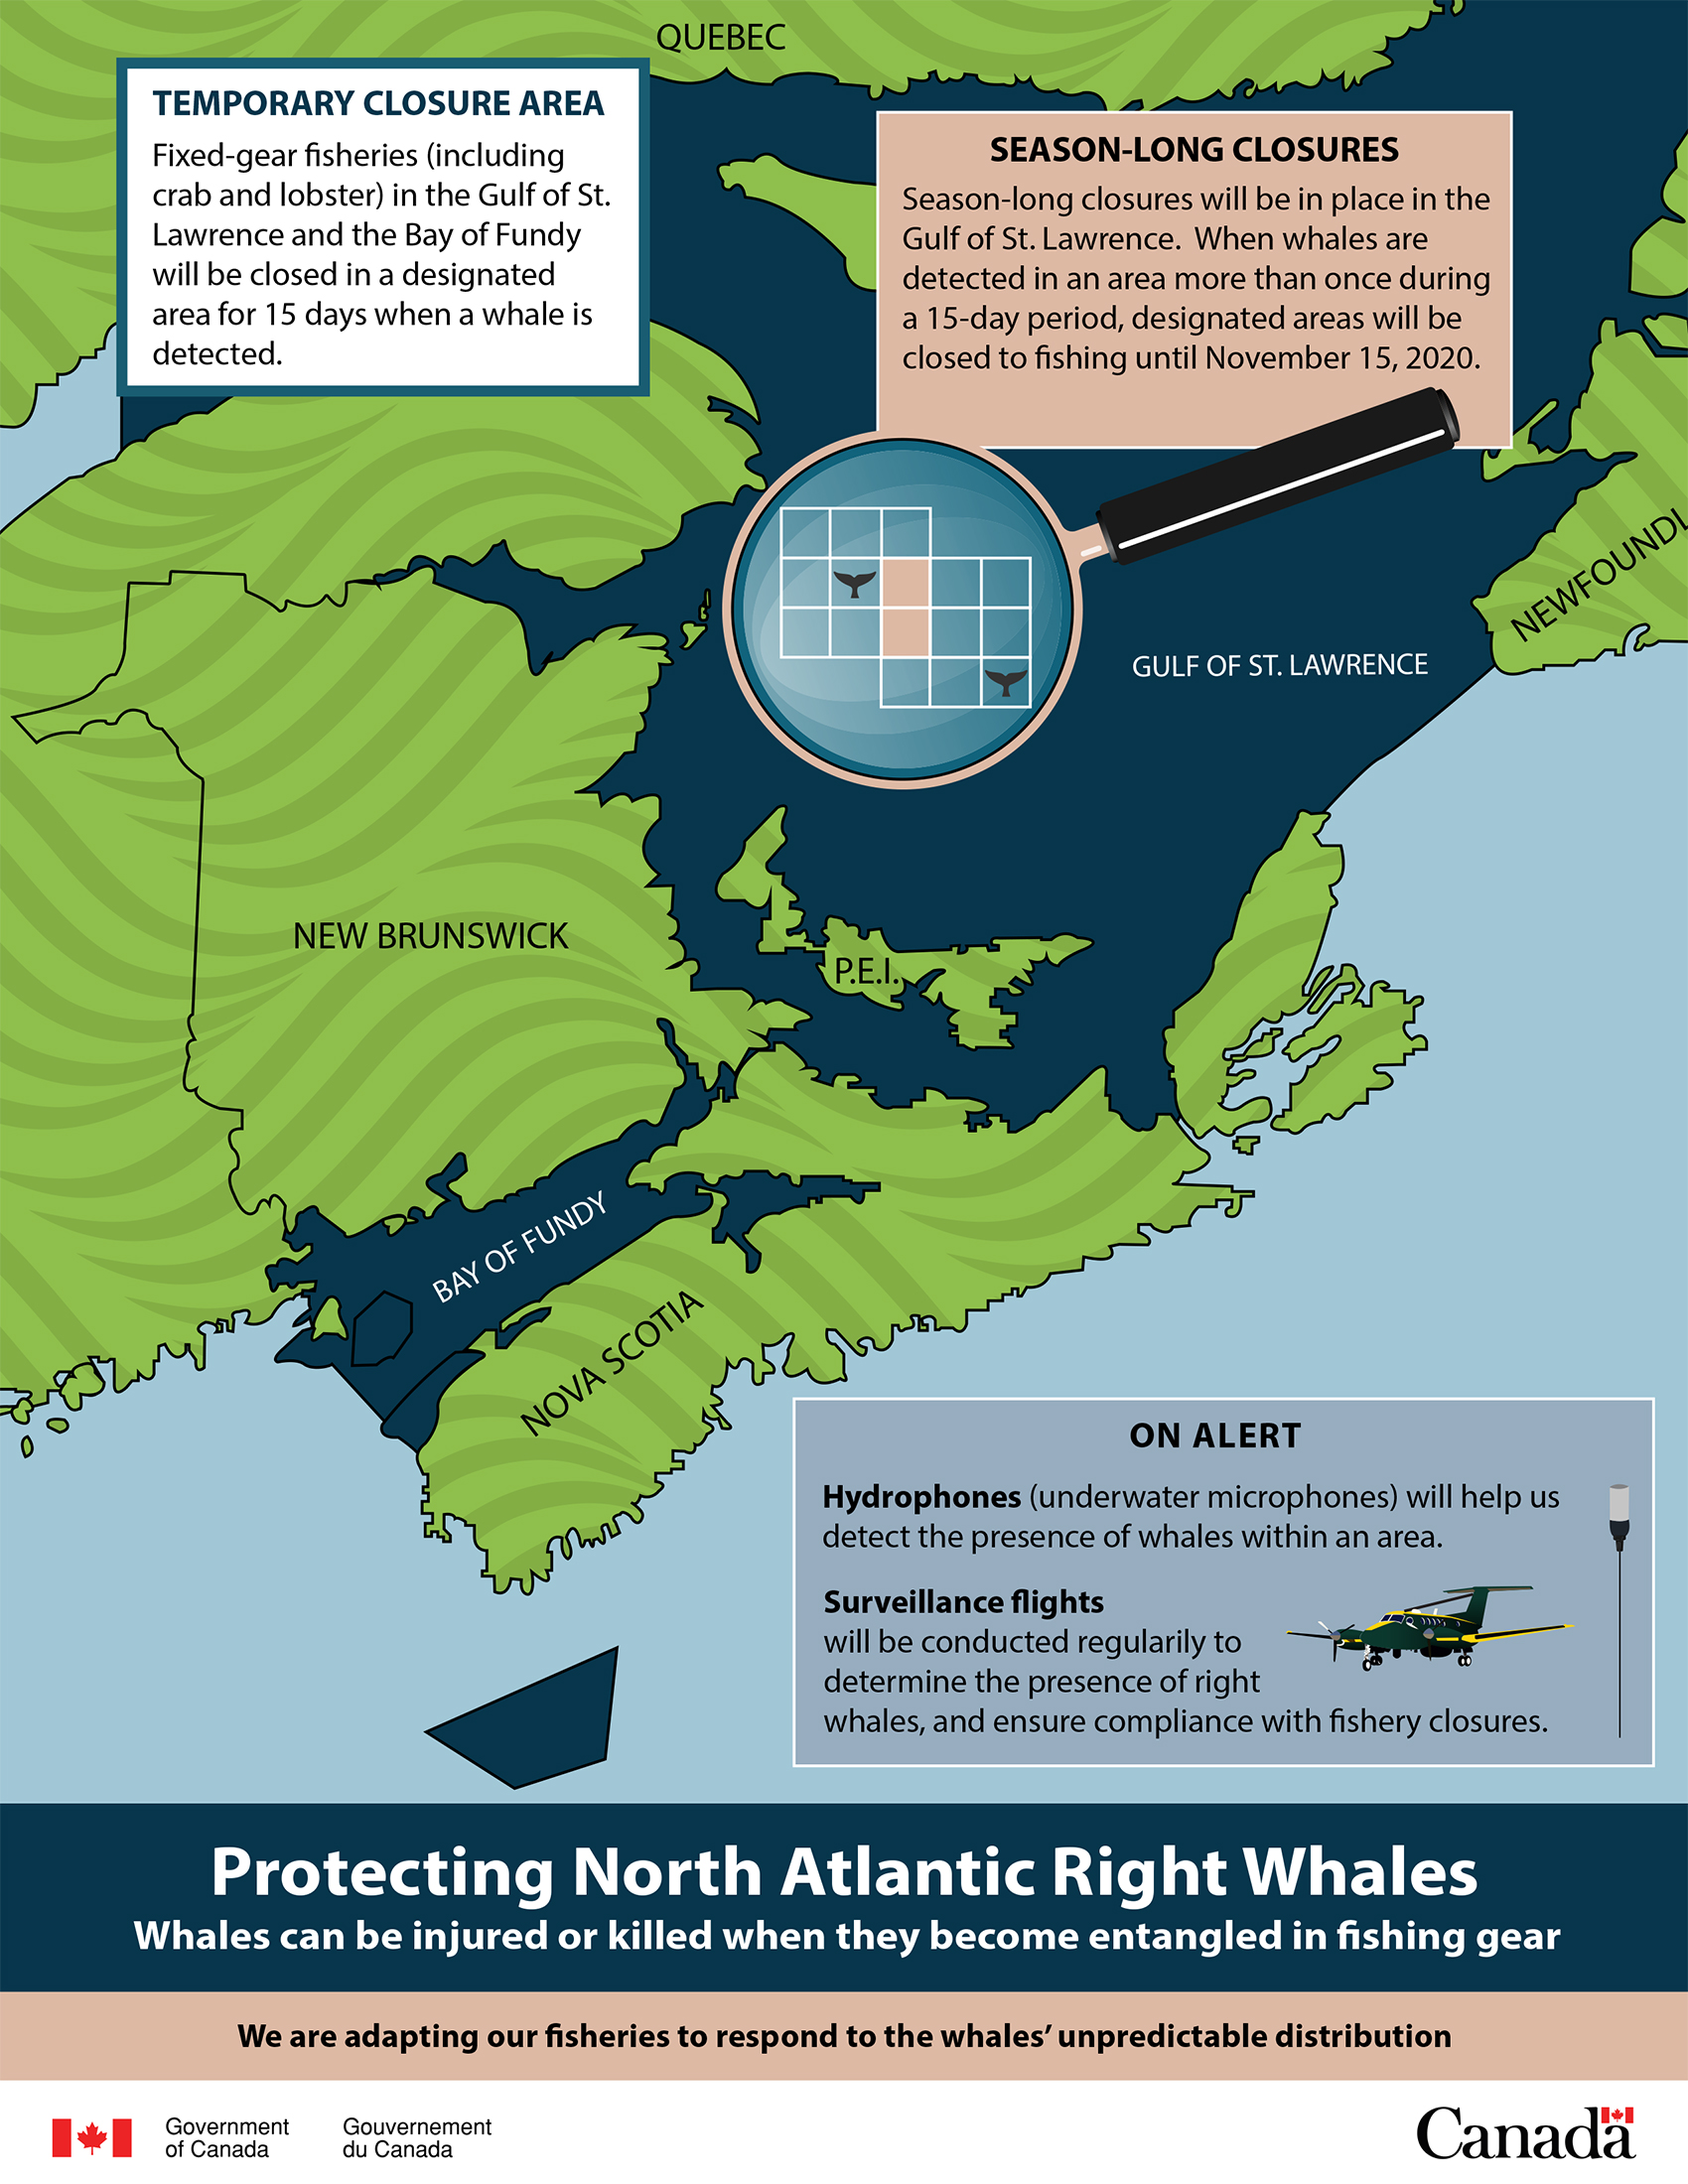 Government of Canada poster. Protecting North Atlantic Right Whales: Whales can be injured or killed when they become entangled in fishing gear. We are adapting our fisheries to respond to the whales’ unpredictable distribution. TEMPORARY CLOSURE: Fixed-gear fisheries (including crab and lobster) in the Gulf of St. Lawrence and the Bay of Fundy will be closed in a designated area for 15 days when a whale is detected. SEASON-LONG CLOSURES: Season-long closures will be in place in the Gulf of St. Lawrence. When whales are detected in an area more than once during a 15-day period, designated areas will be closed to fishing until November 15, 2020. ON ALERT: Hydrophones (underwater microphones) will help us detect the presence of whales within an area. Surveillance flights will be conducted regularly to determine the presence of right whales, and ensure compliance with fishery closures.